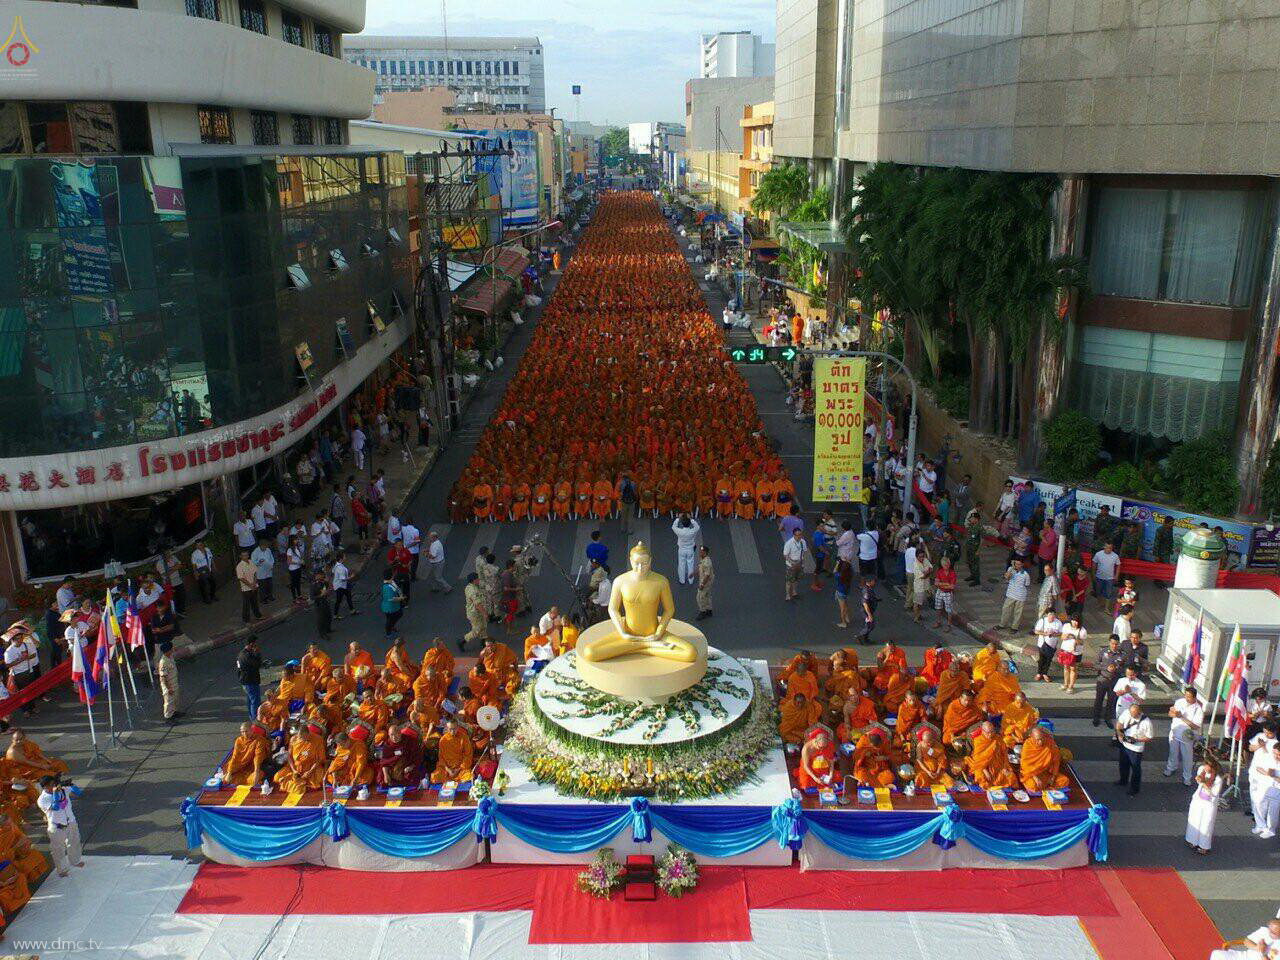 Over 10,000 Monks Gather for Buddhist Alms Offering in Thailand